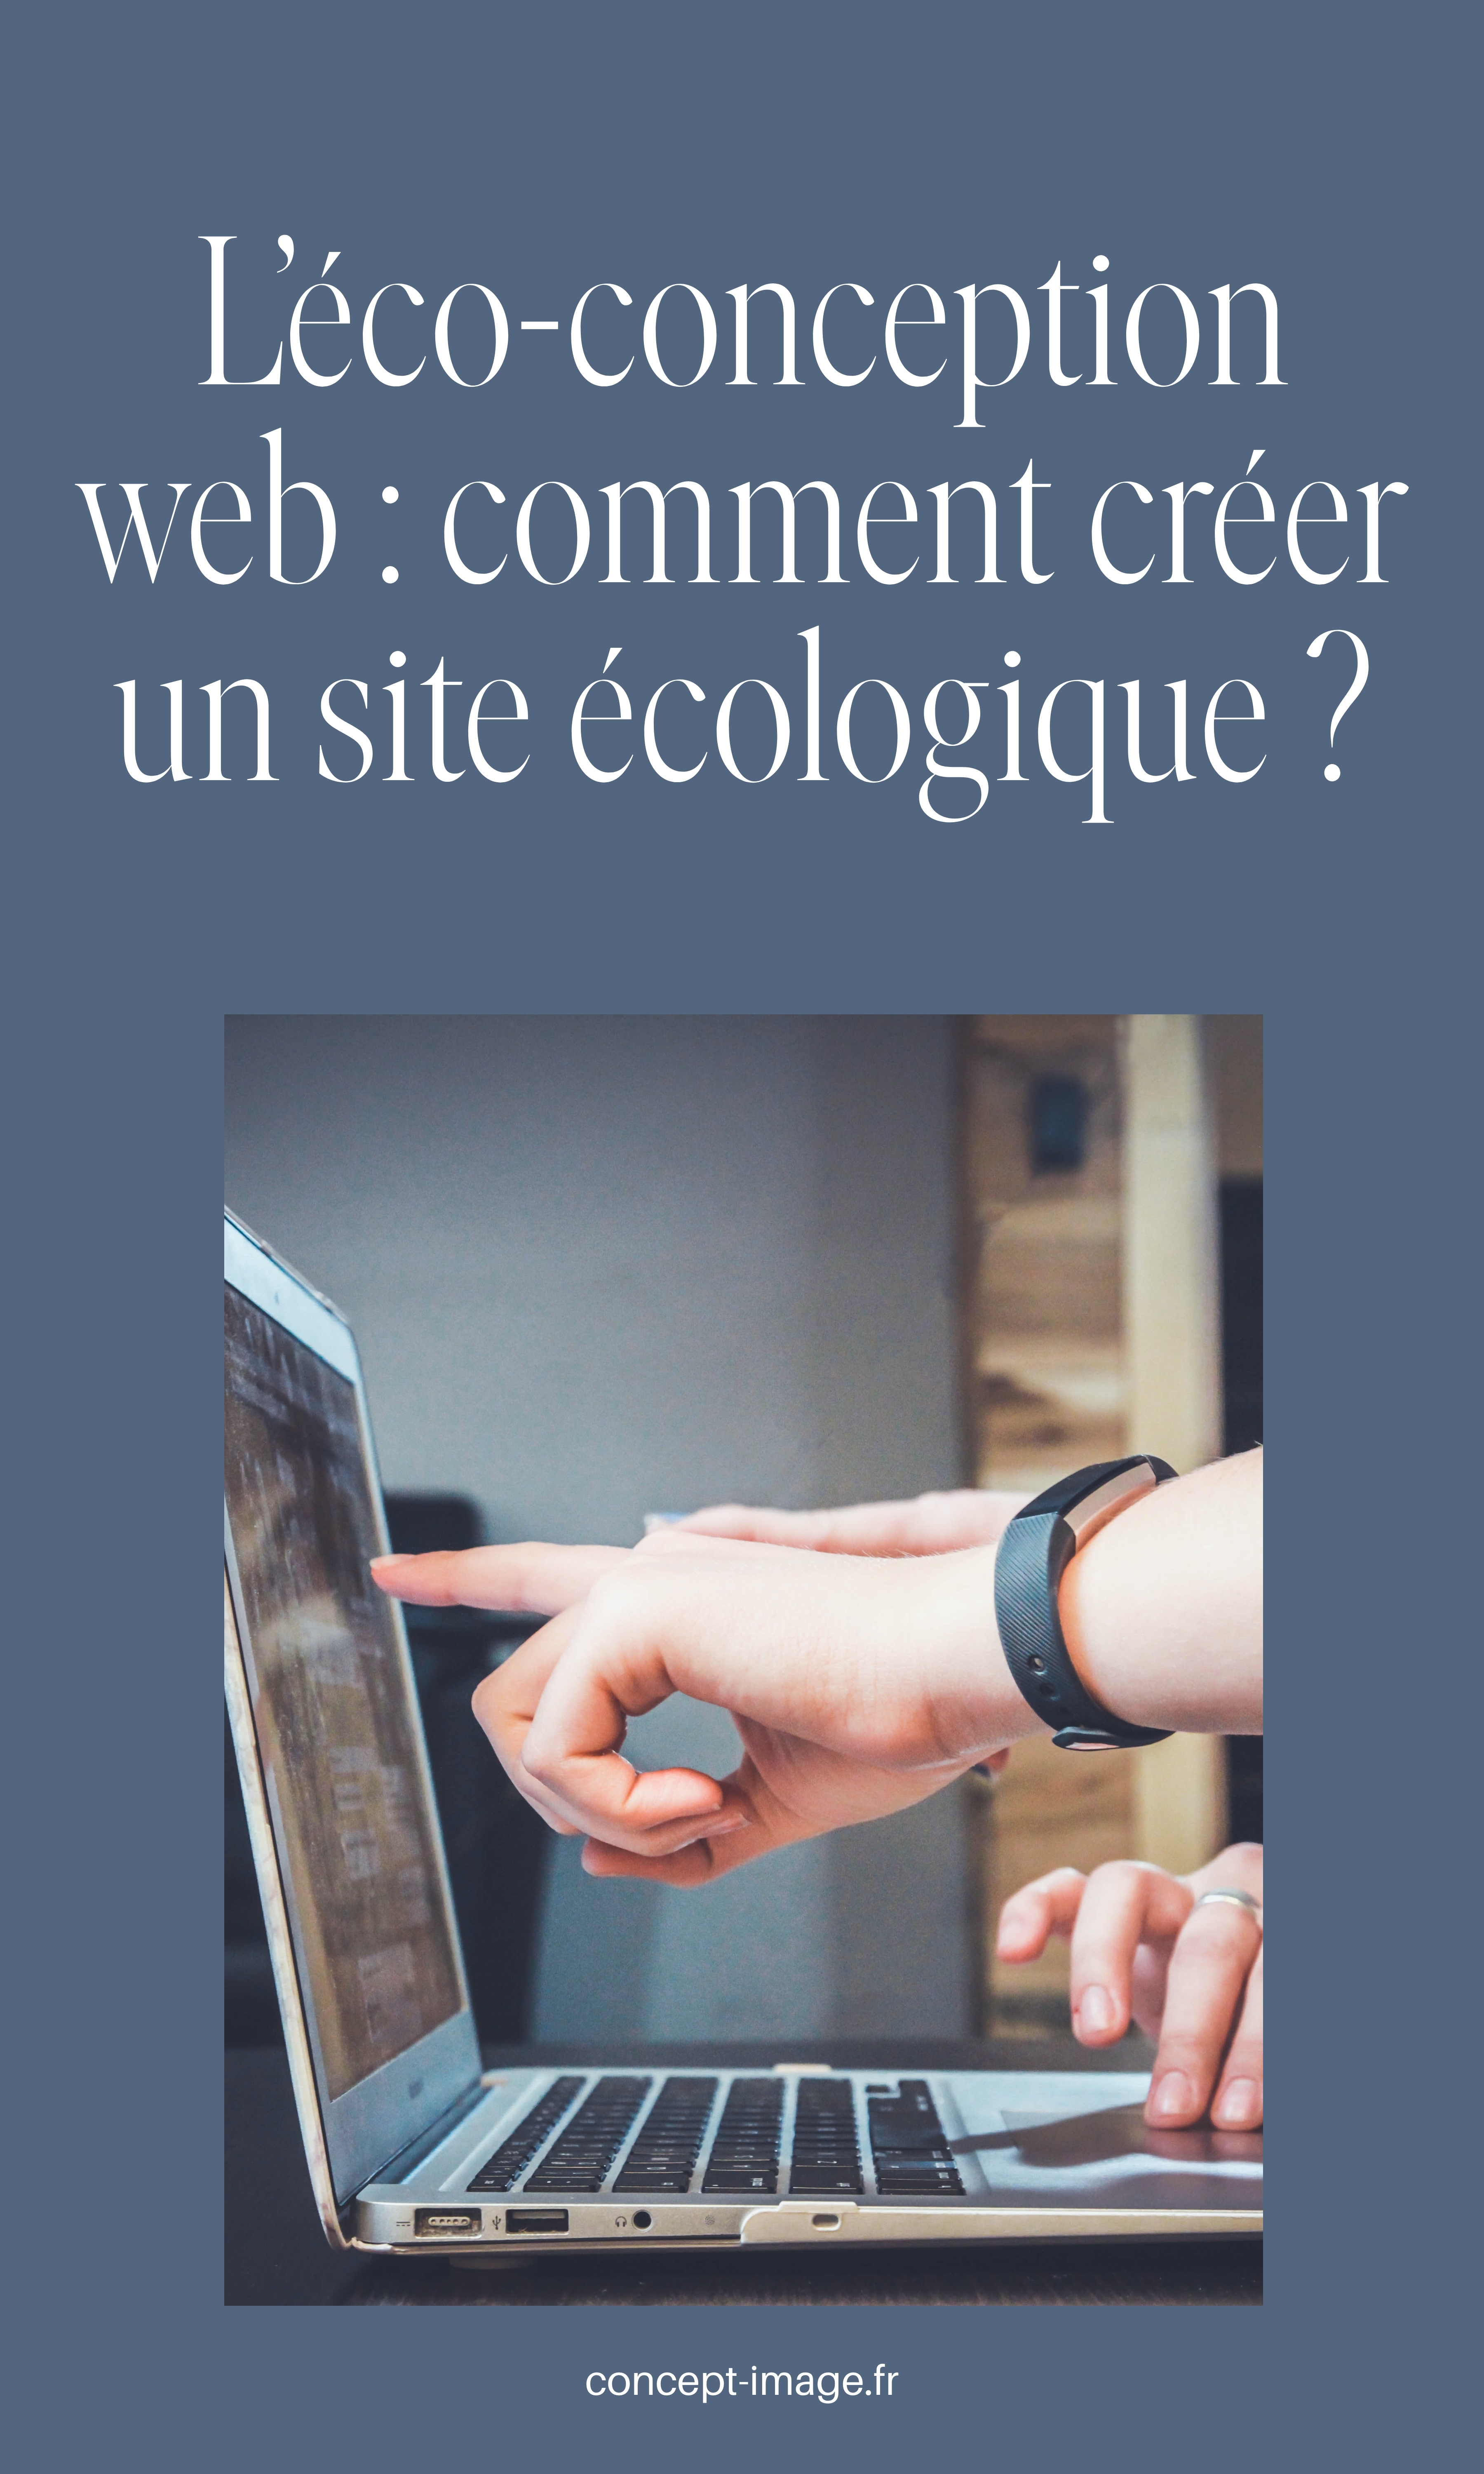 WEB ECO-CONCEPTION: HOW TO CREATE AN ECOLOGICAL SITE?